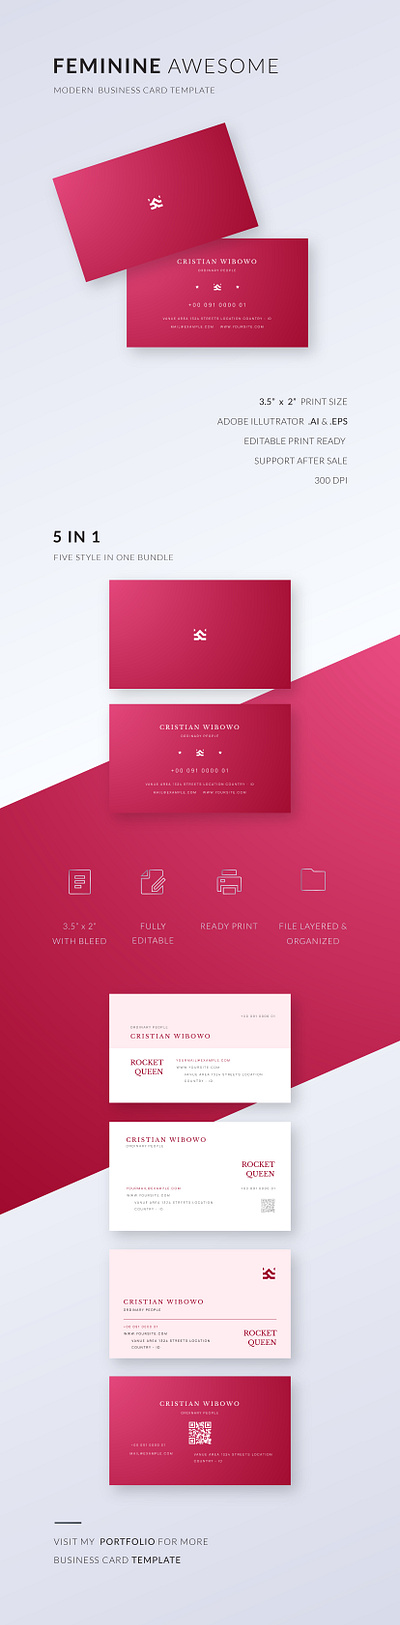 FEMINIME AWESOME BUSINESS CARD TEMPLATE awesome awesome pink branding business business card business cards card creative editable feminine feminine business card heard logo marketing modern pink pink business card vector woman woman business card